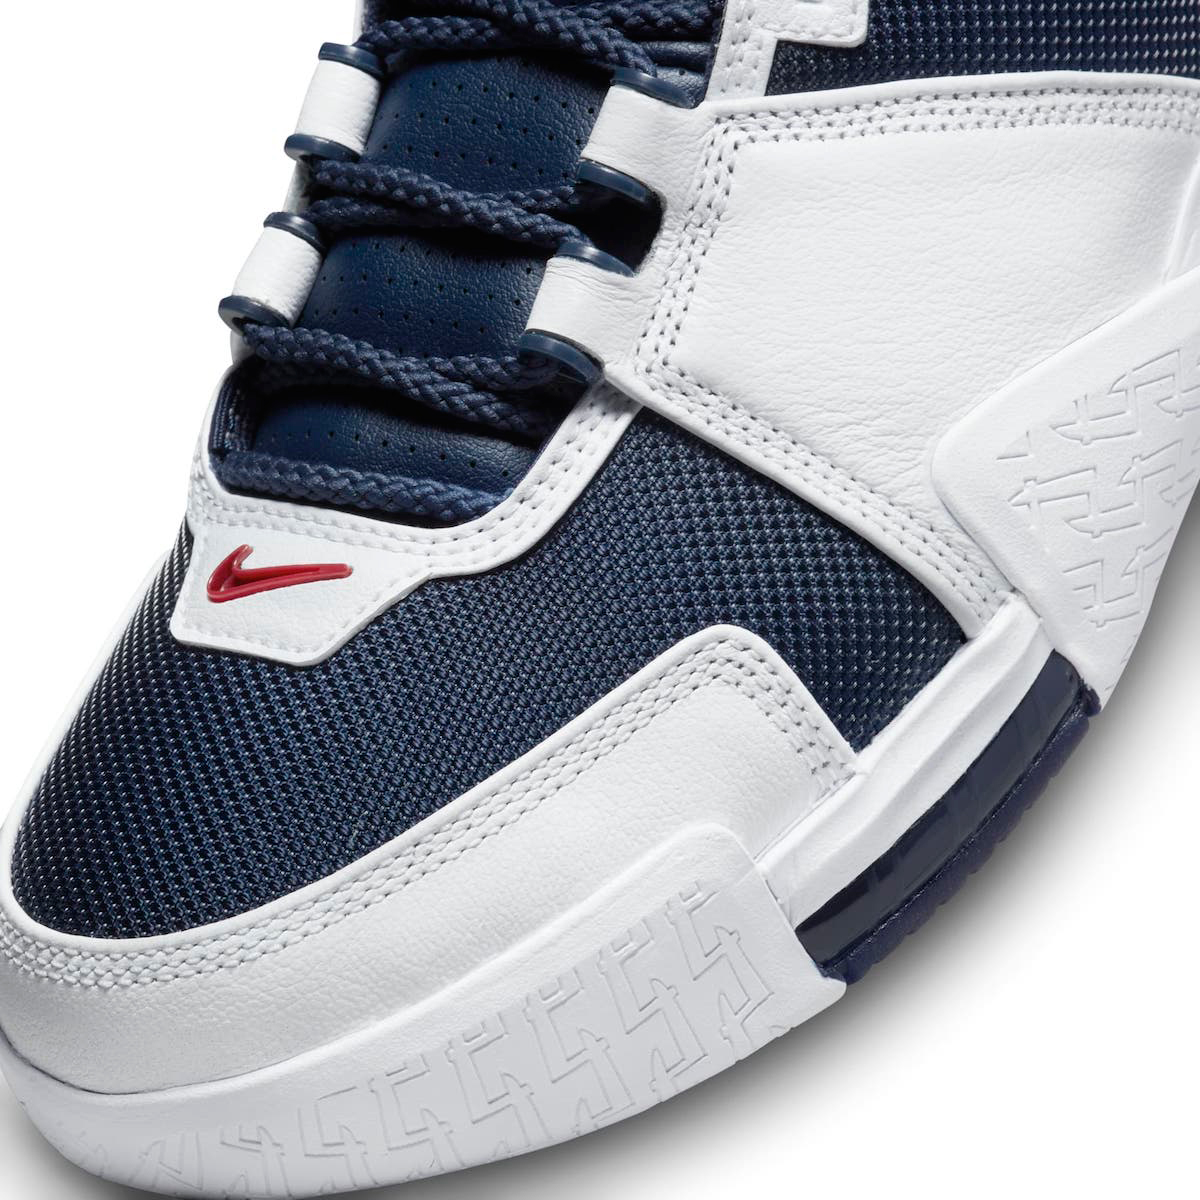 Nike-LeBron-2-USA-Midnight-Navy-Release-Date-8